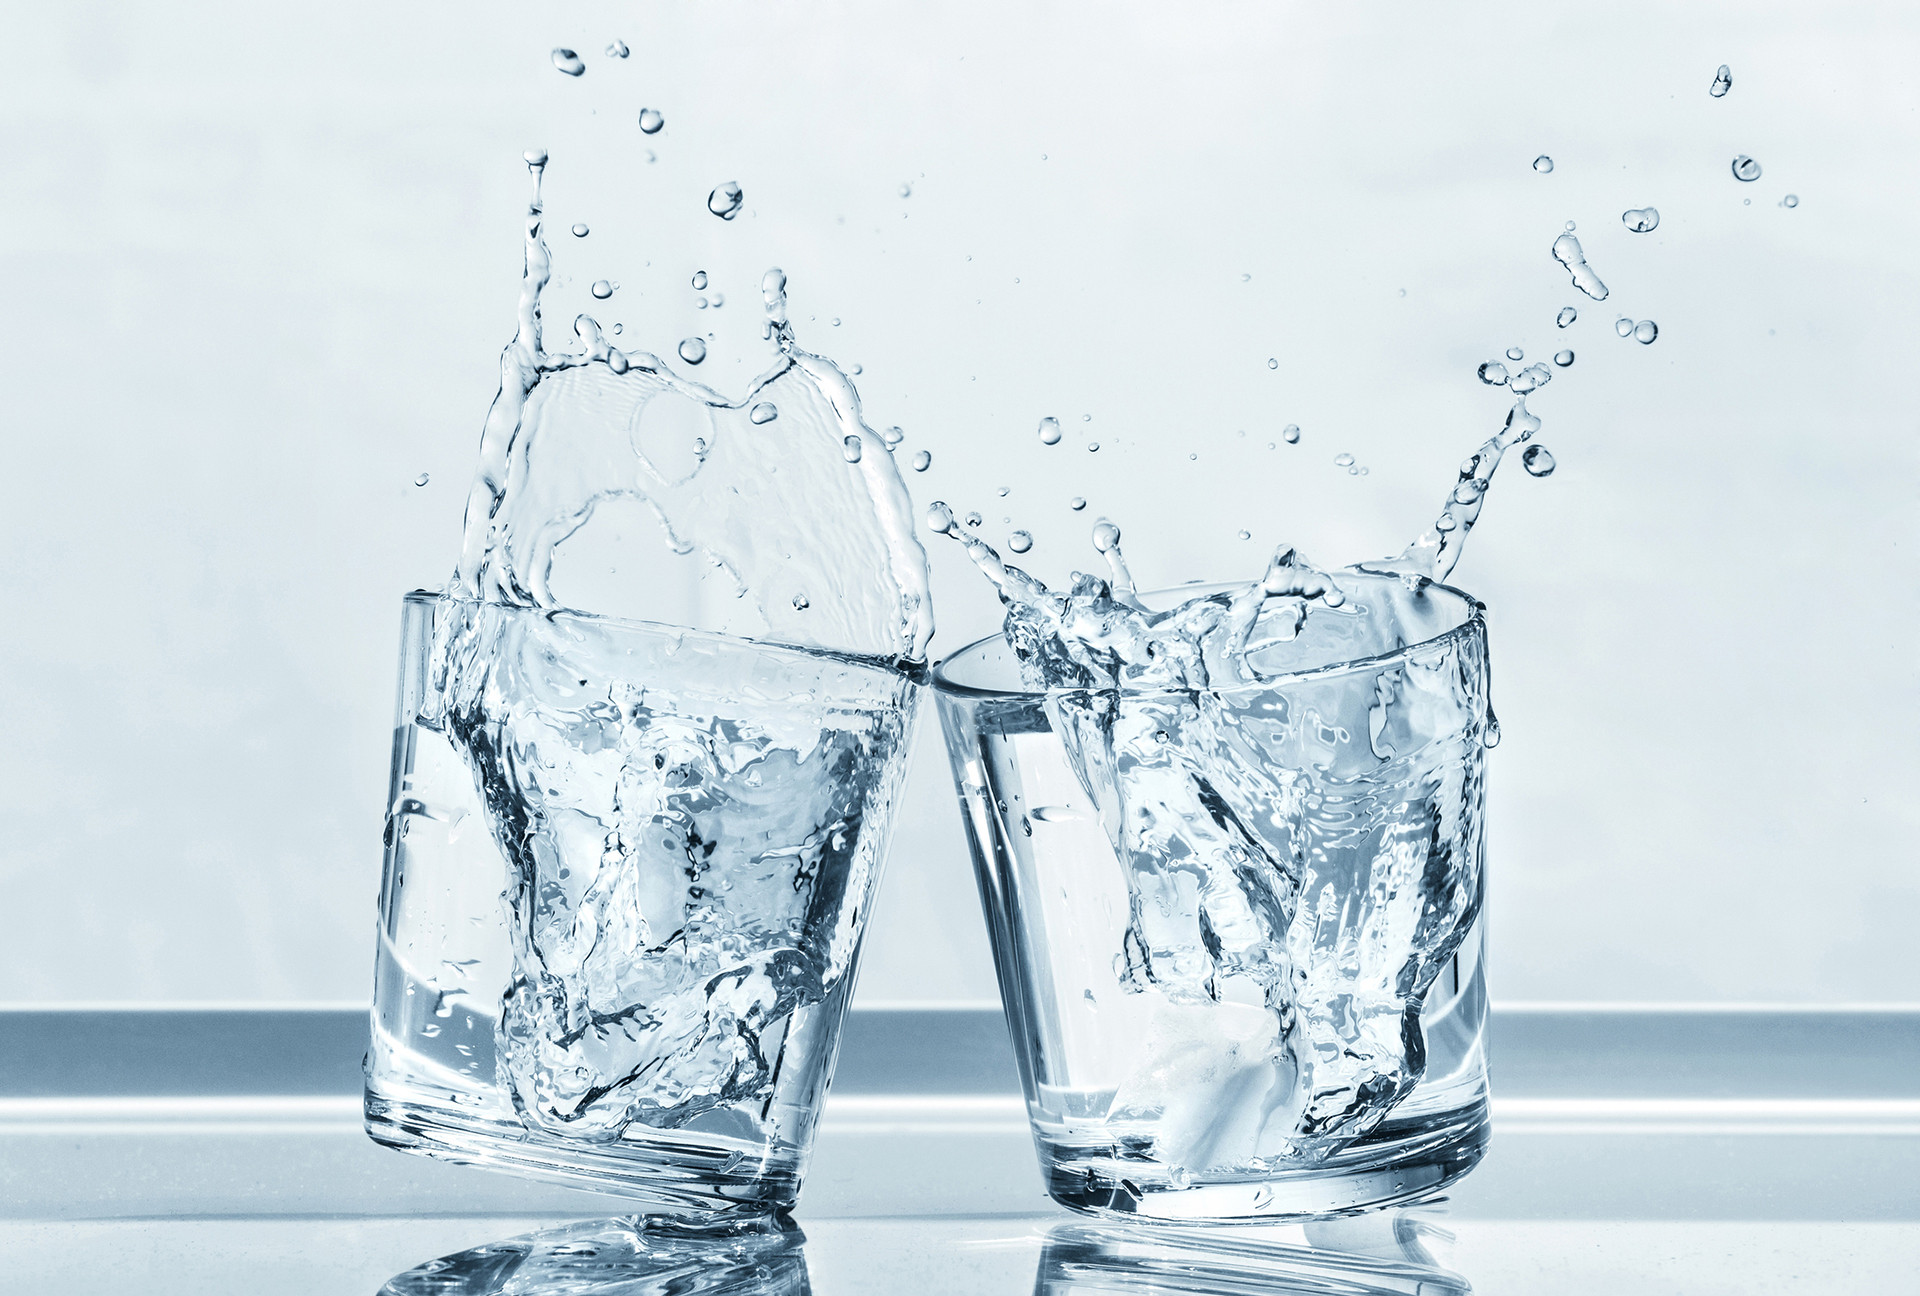 Two glasses of water clinking together with droplets splashing out